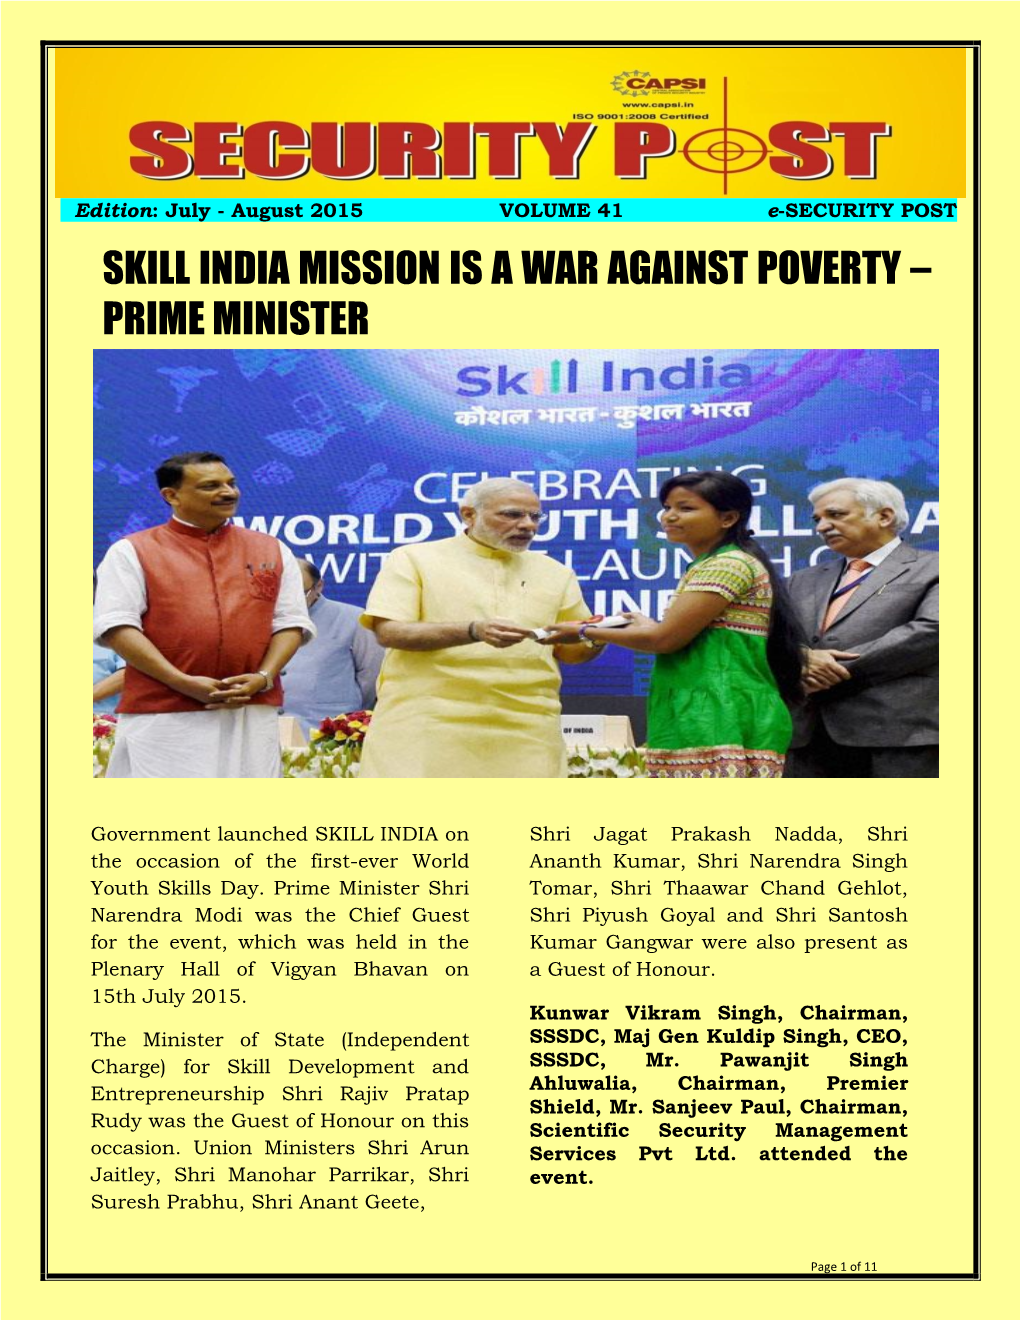 Skill India Mission Is a War Against Poverty –